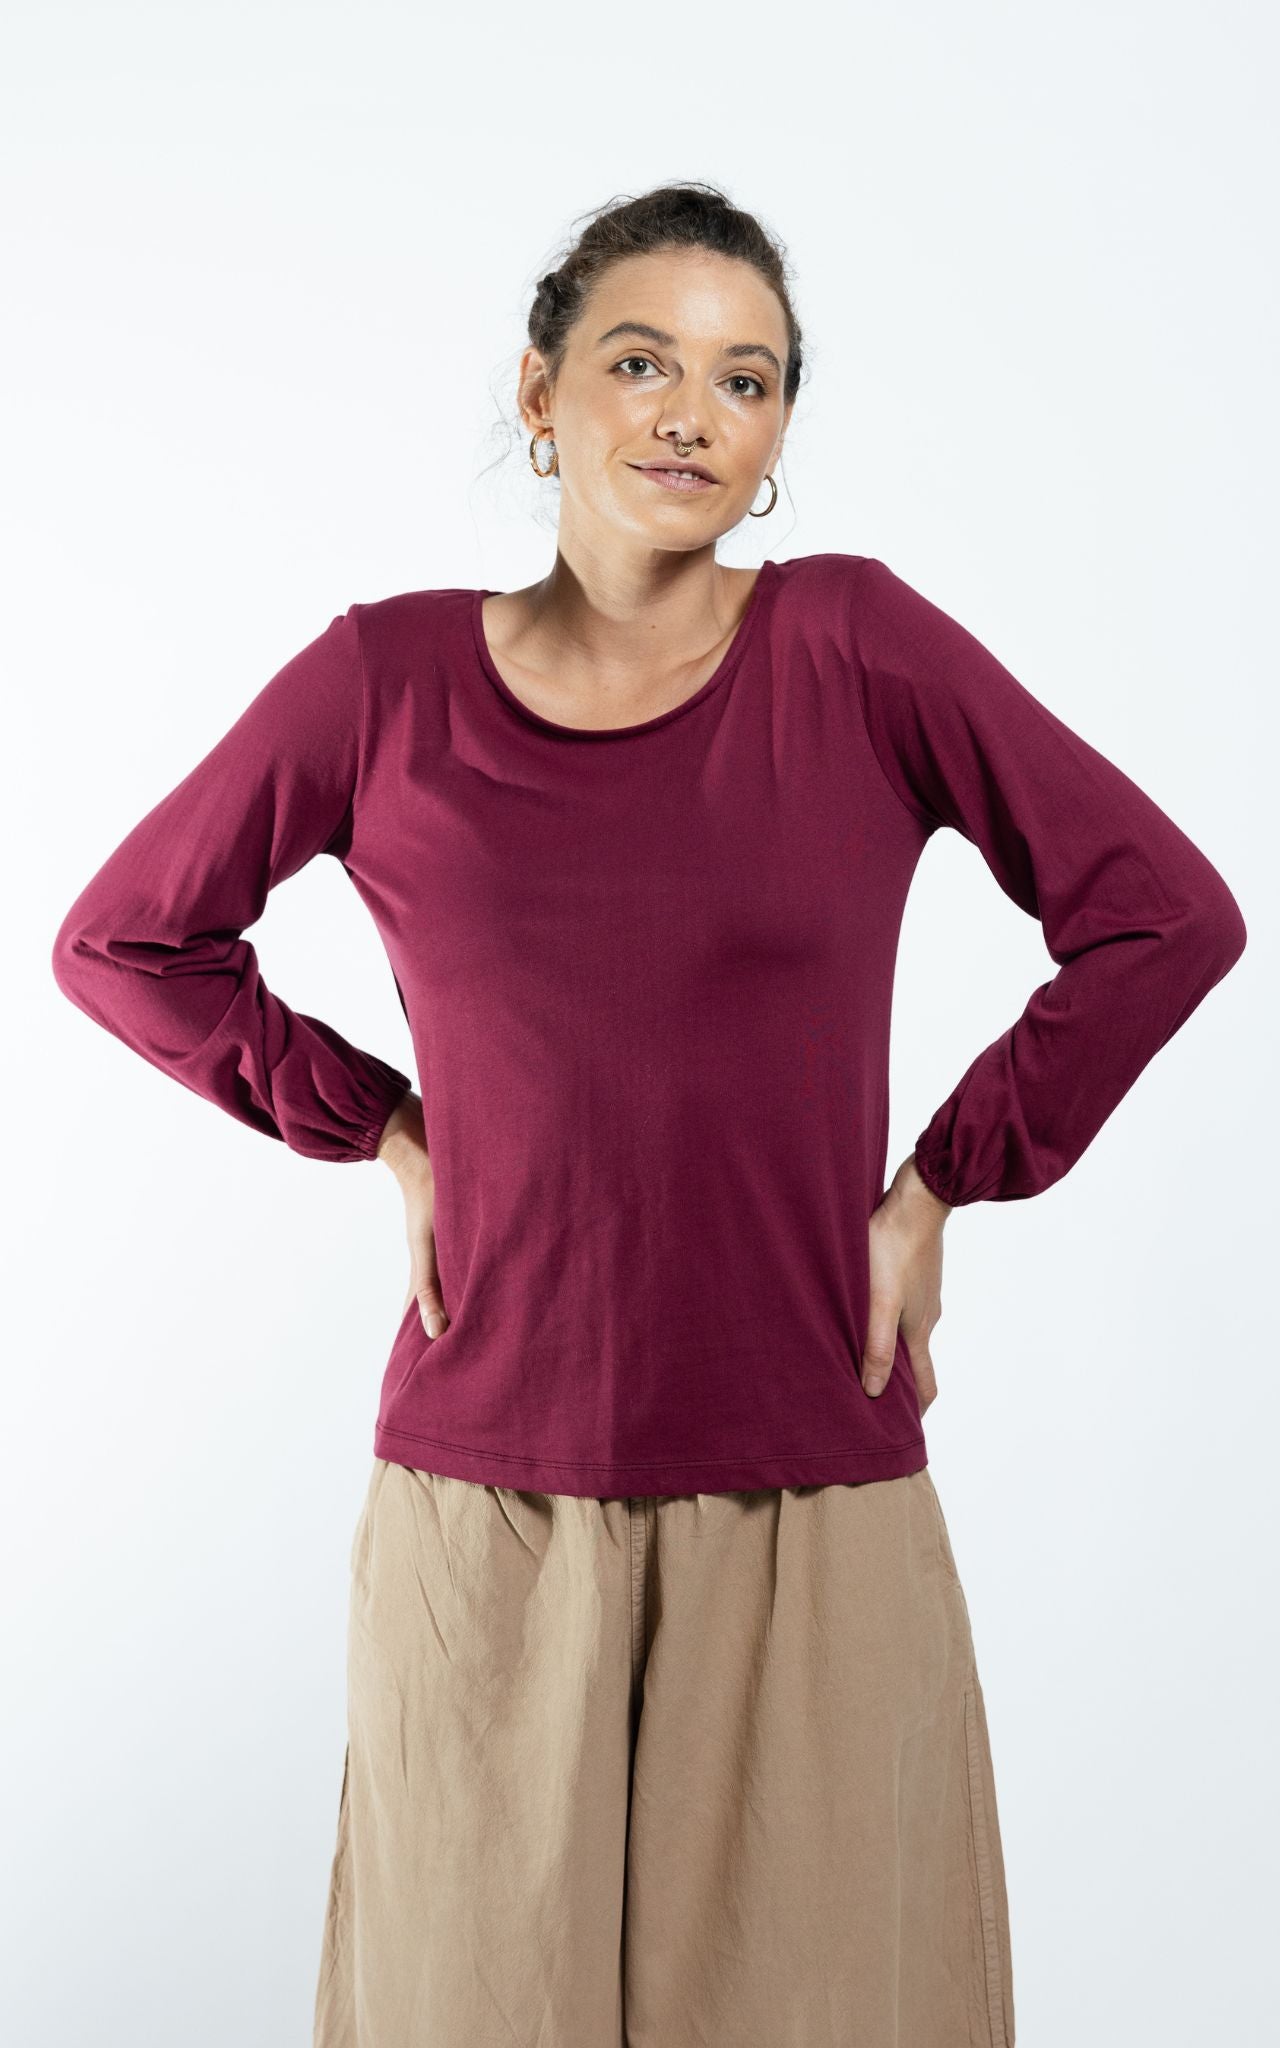 Surya The Label Ethical Organic Cotton 'Zoé' Top made in Nepal - Berry